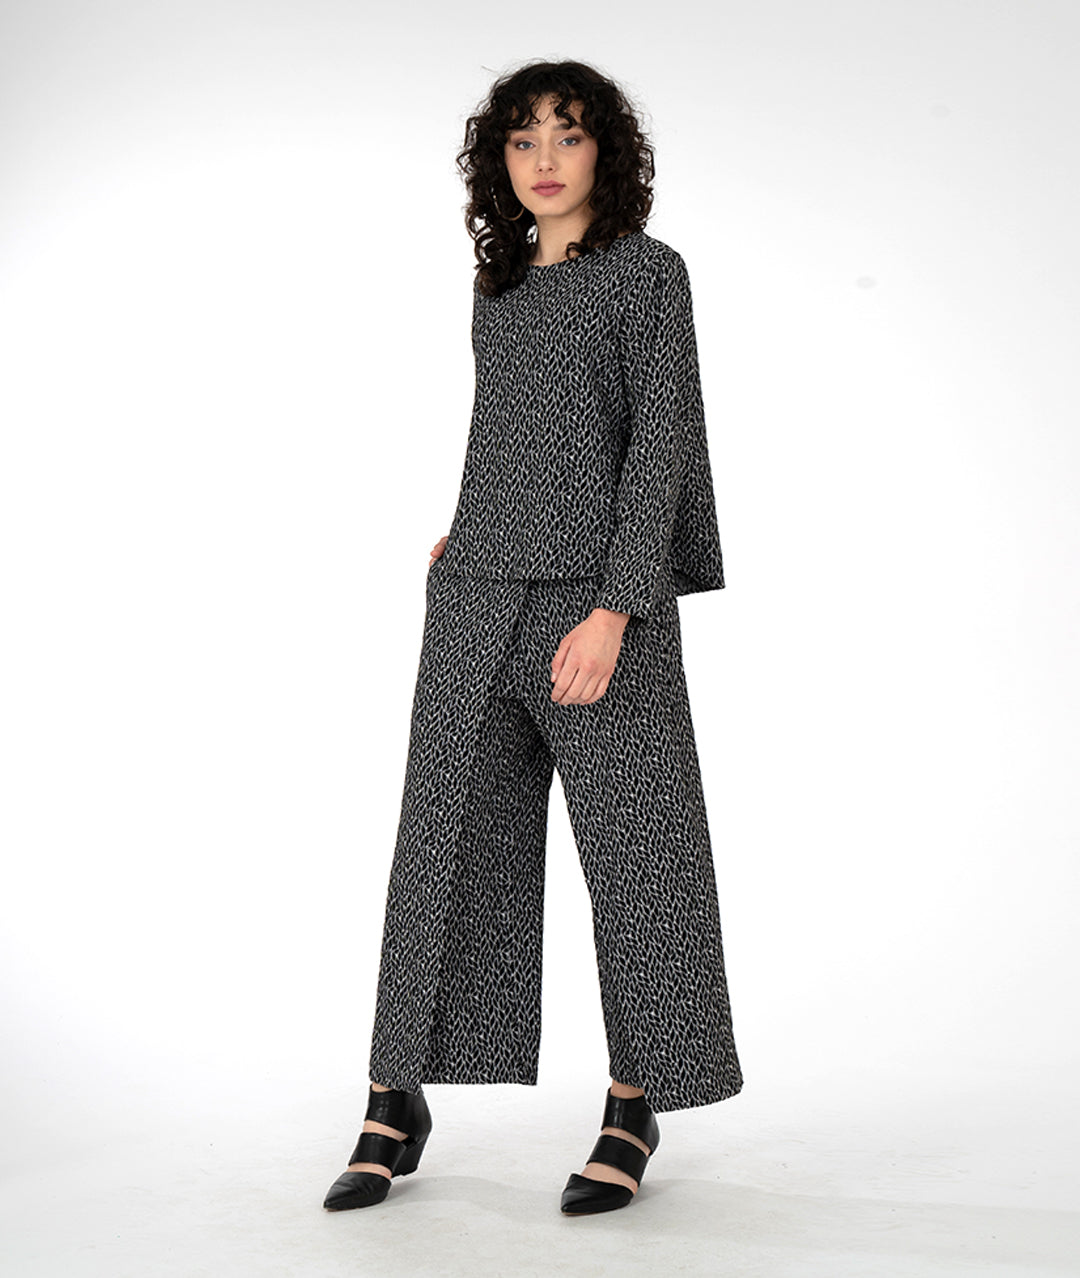 model in a wide leg grey and black leaf print pant with an overlapping front, worn with a matching pullover top with long sleeves and a high round neckline